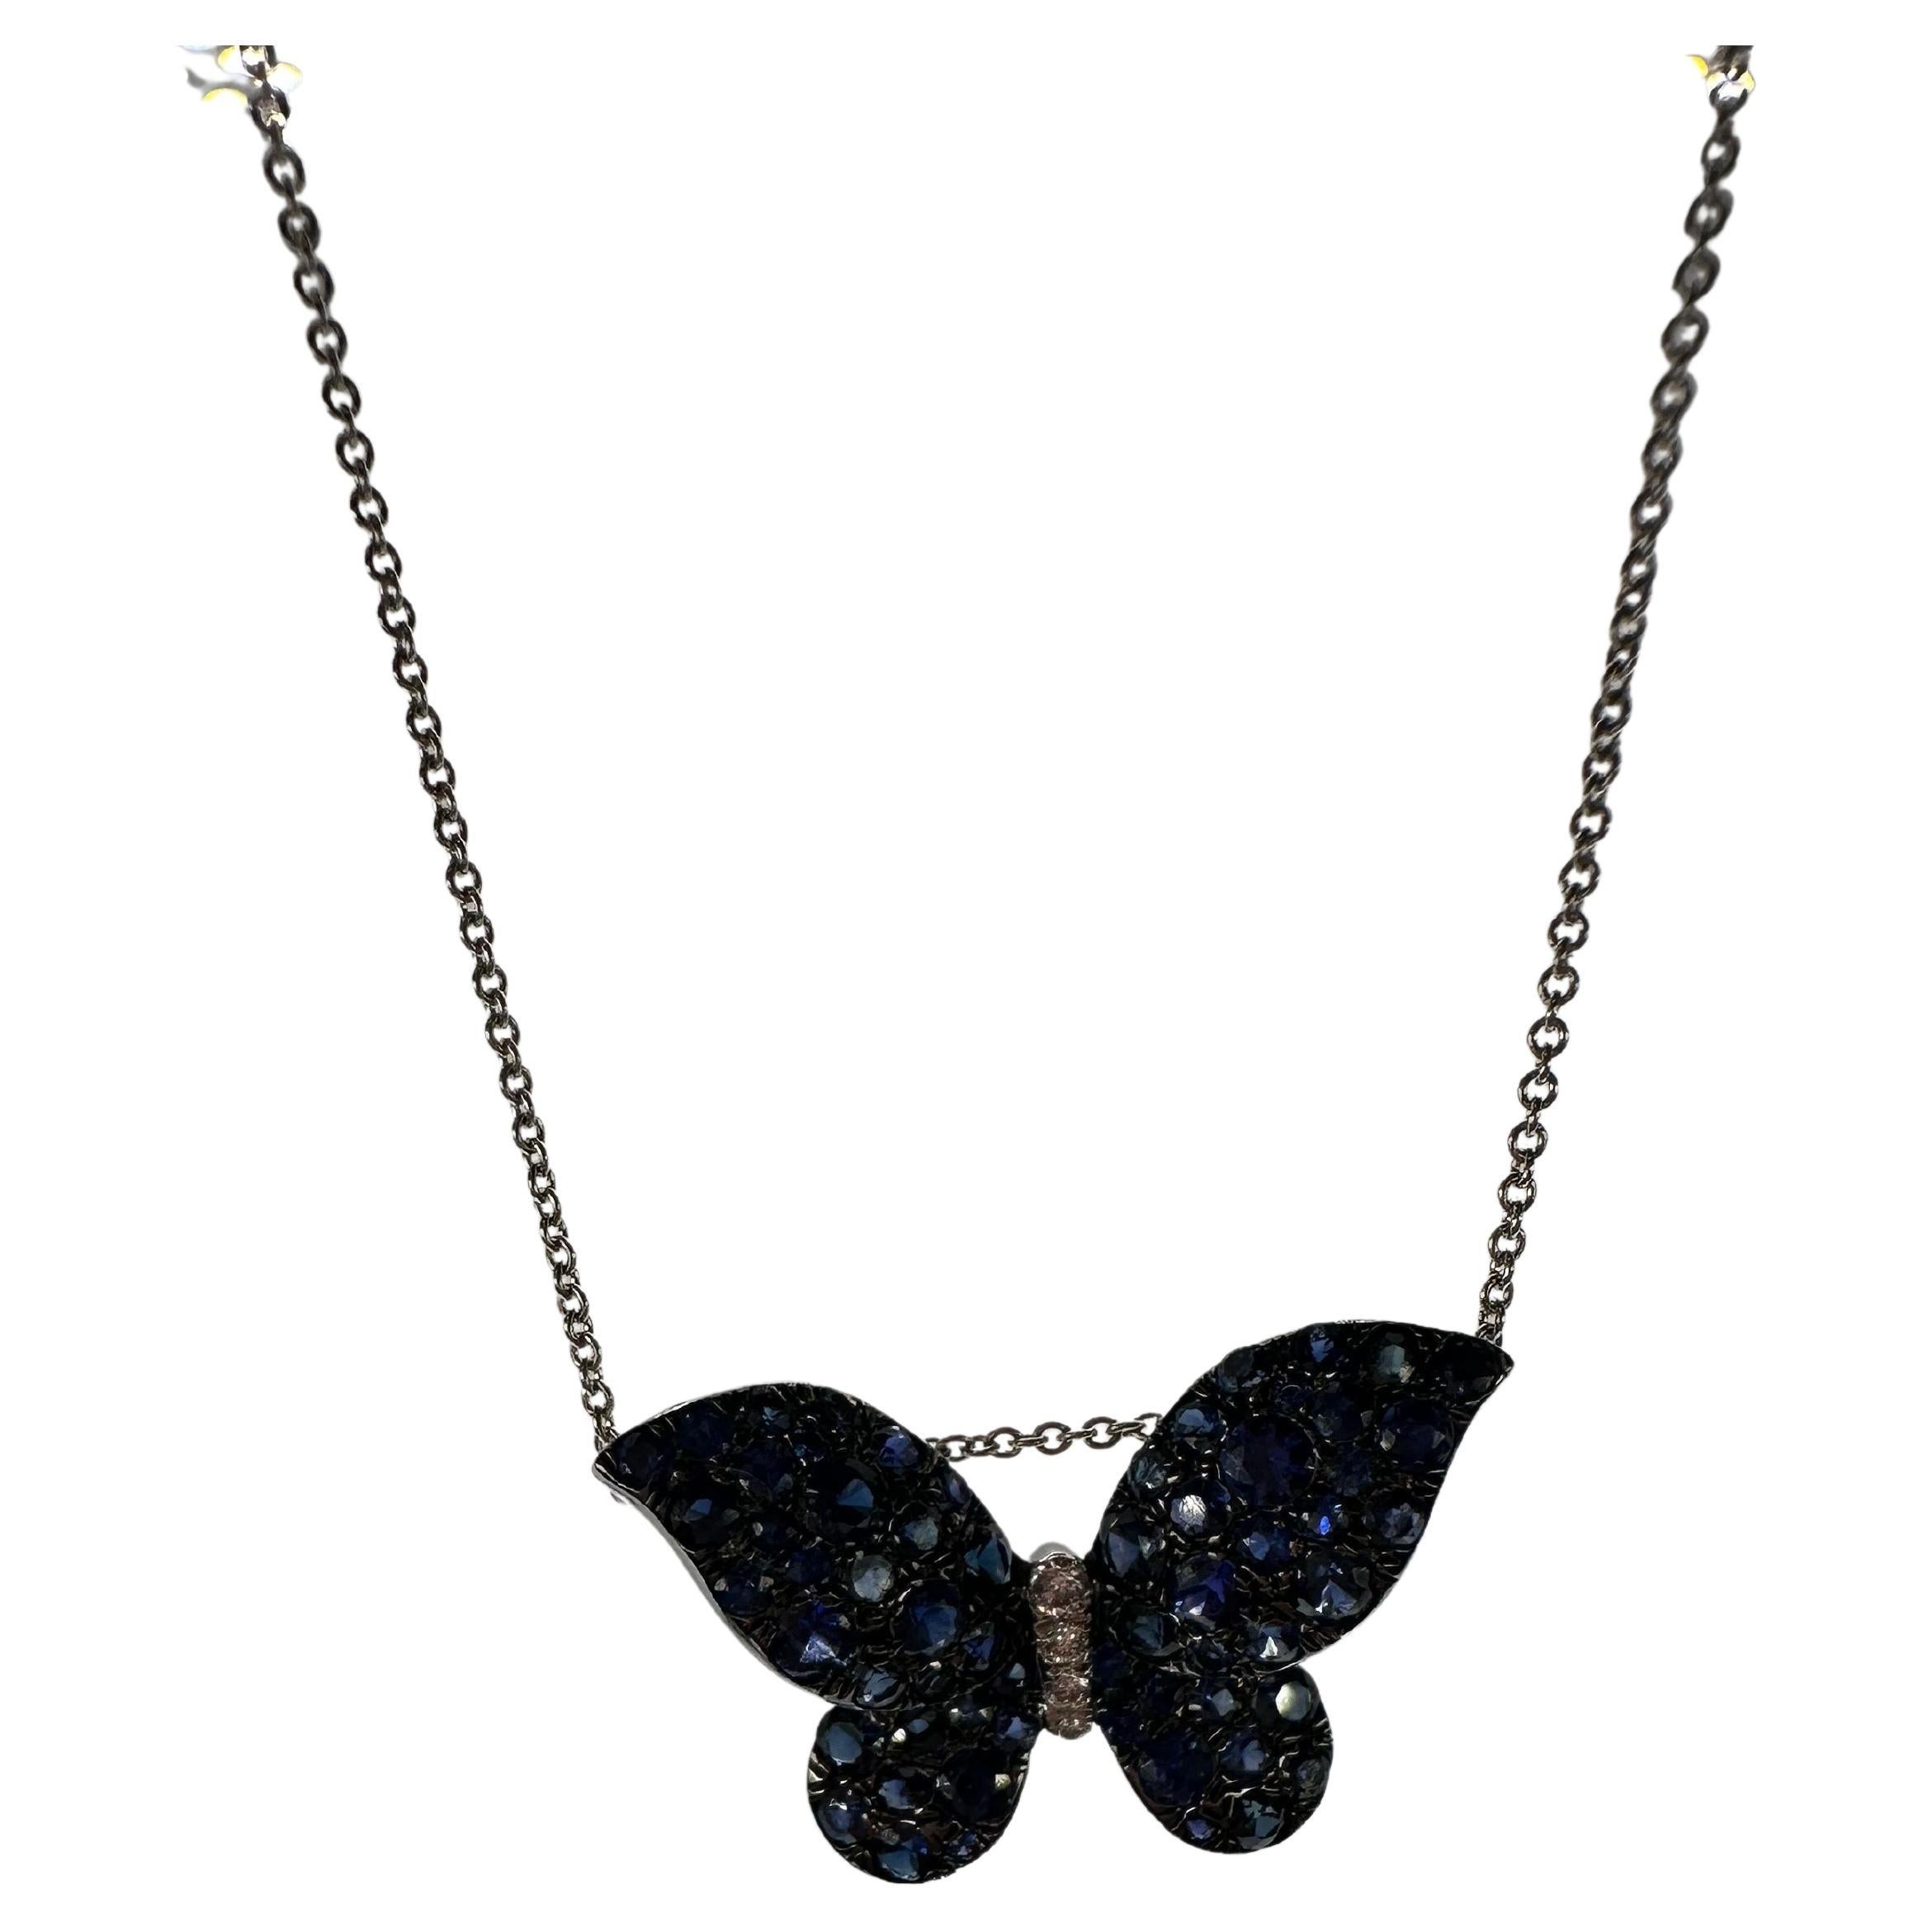 Large butterfly pendant necklace in 14KT white gold, 18 inches chain.

GOLD: 14KT gold
NATURAL DIAMOND(S)
Clarity/Color: VS/G
Carat:0.04ct
NATURAL SAPPHIRE(S)
Clarity/Color: Slightly Included/Blue
Grams:3.80
Item#: 160-00079 RRT

WHAT YOU GET AT